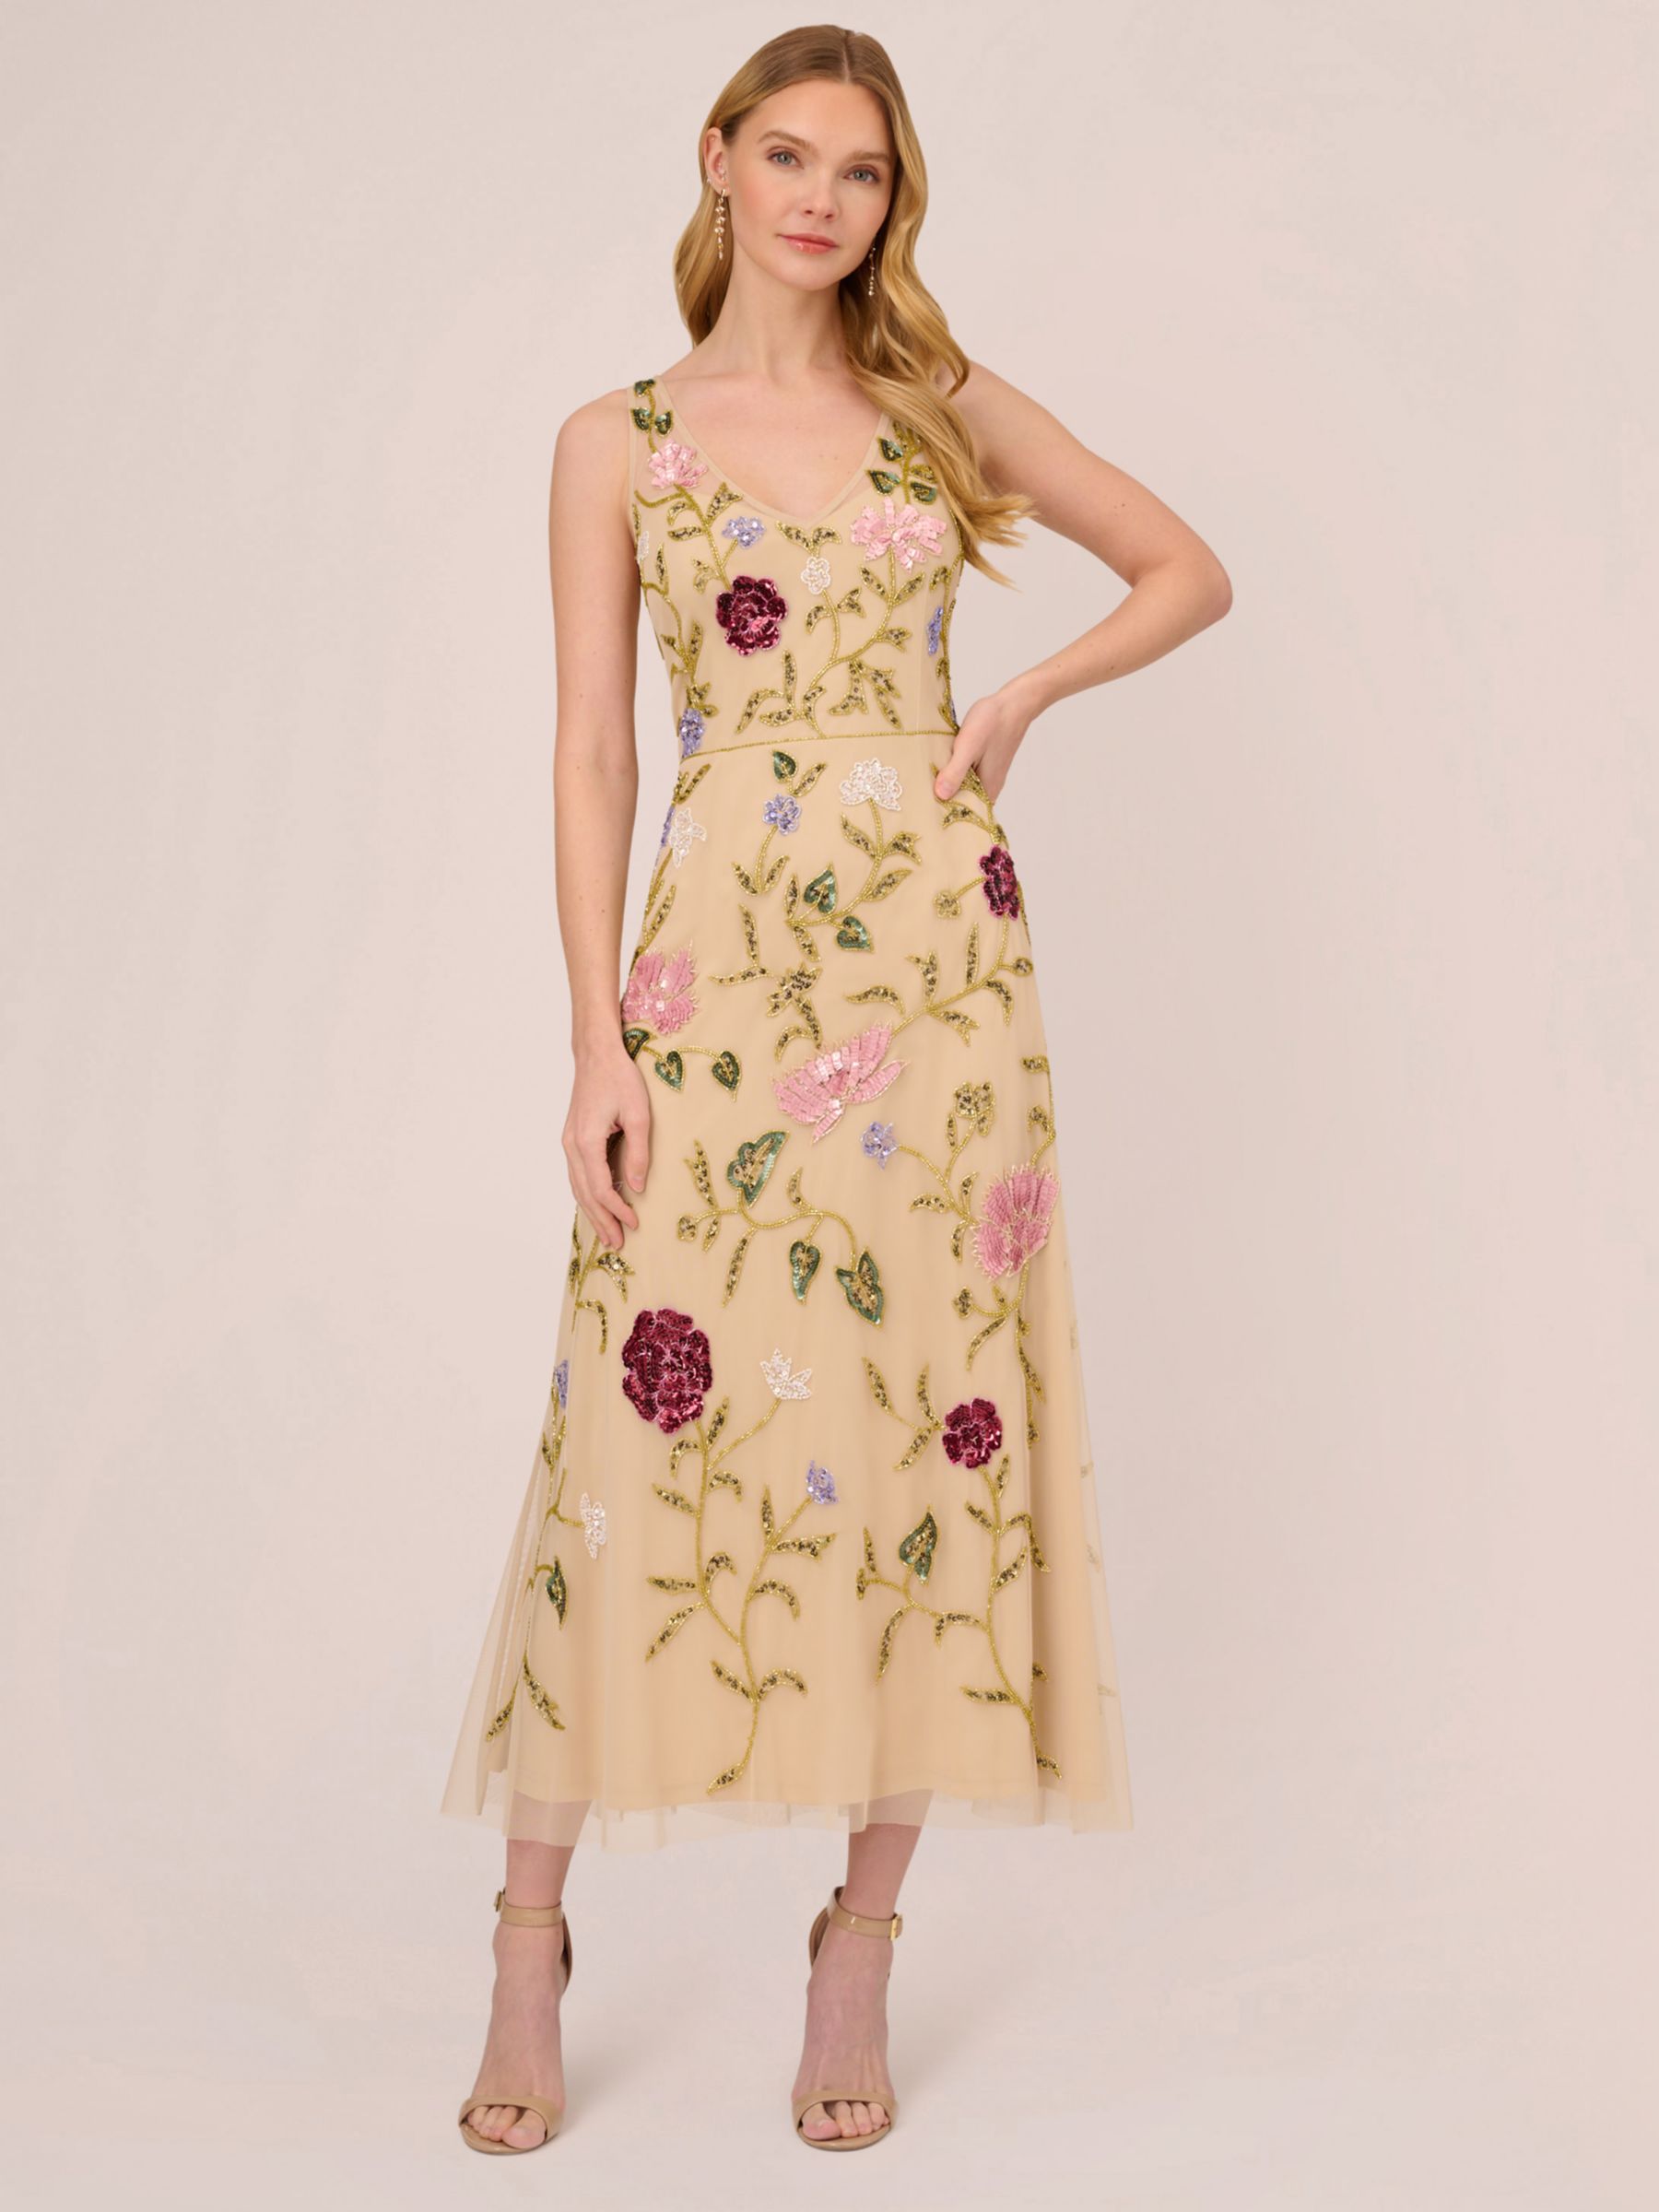 Adrianna Papell 40160 Floral Beaded Dress 